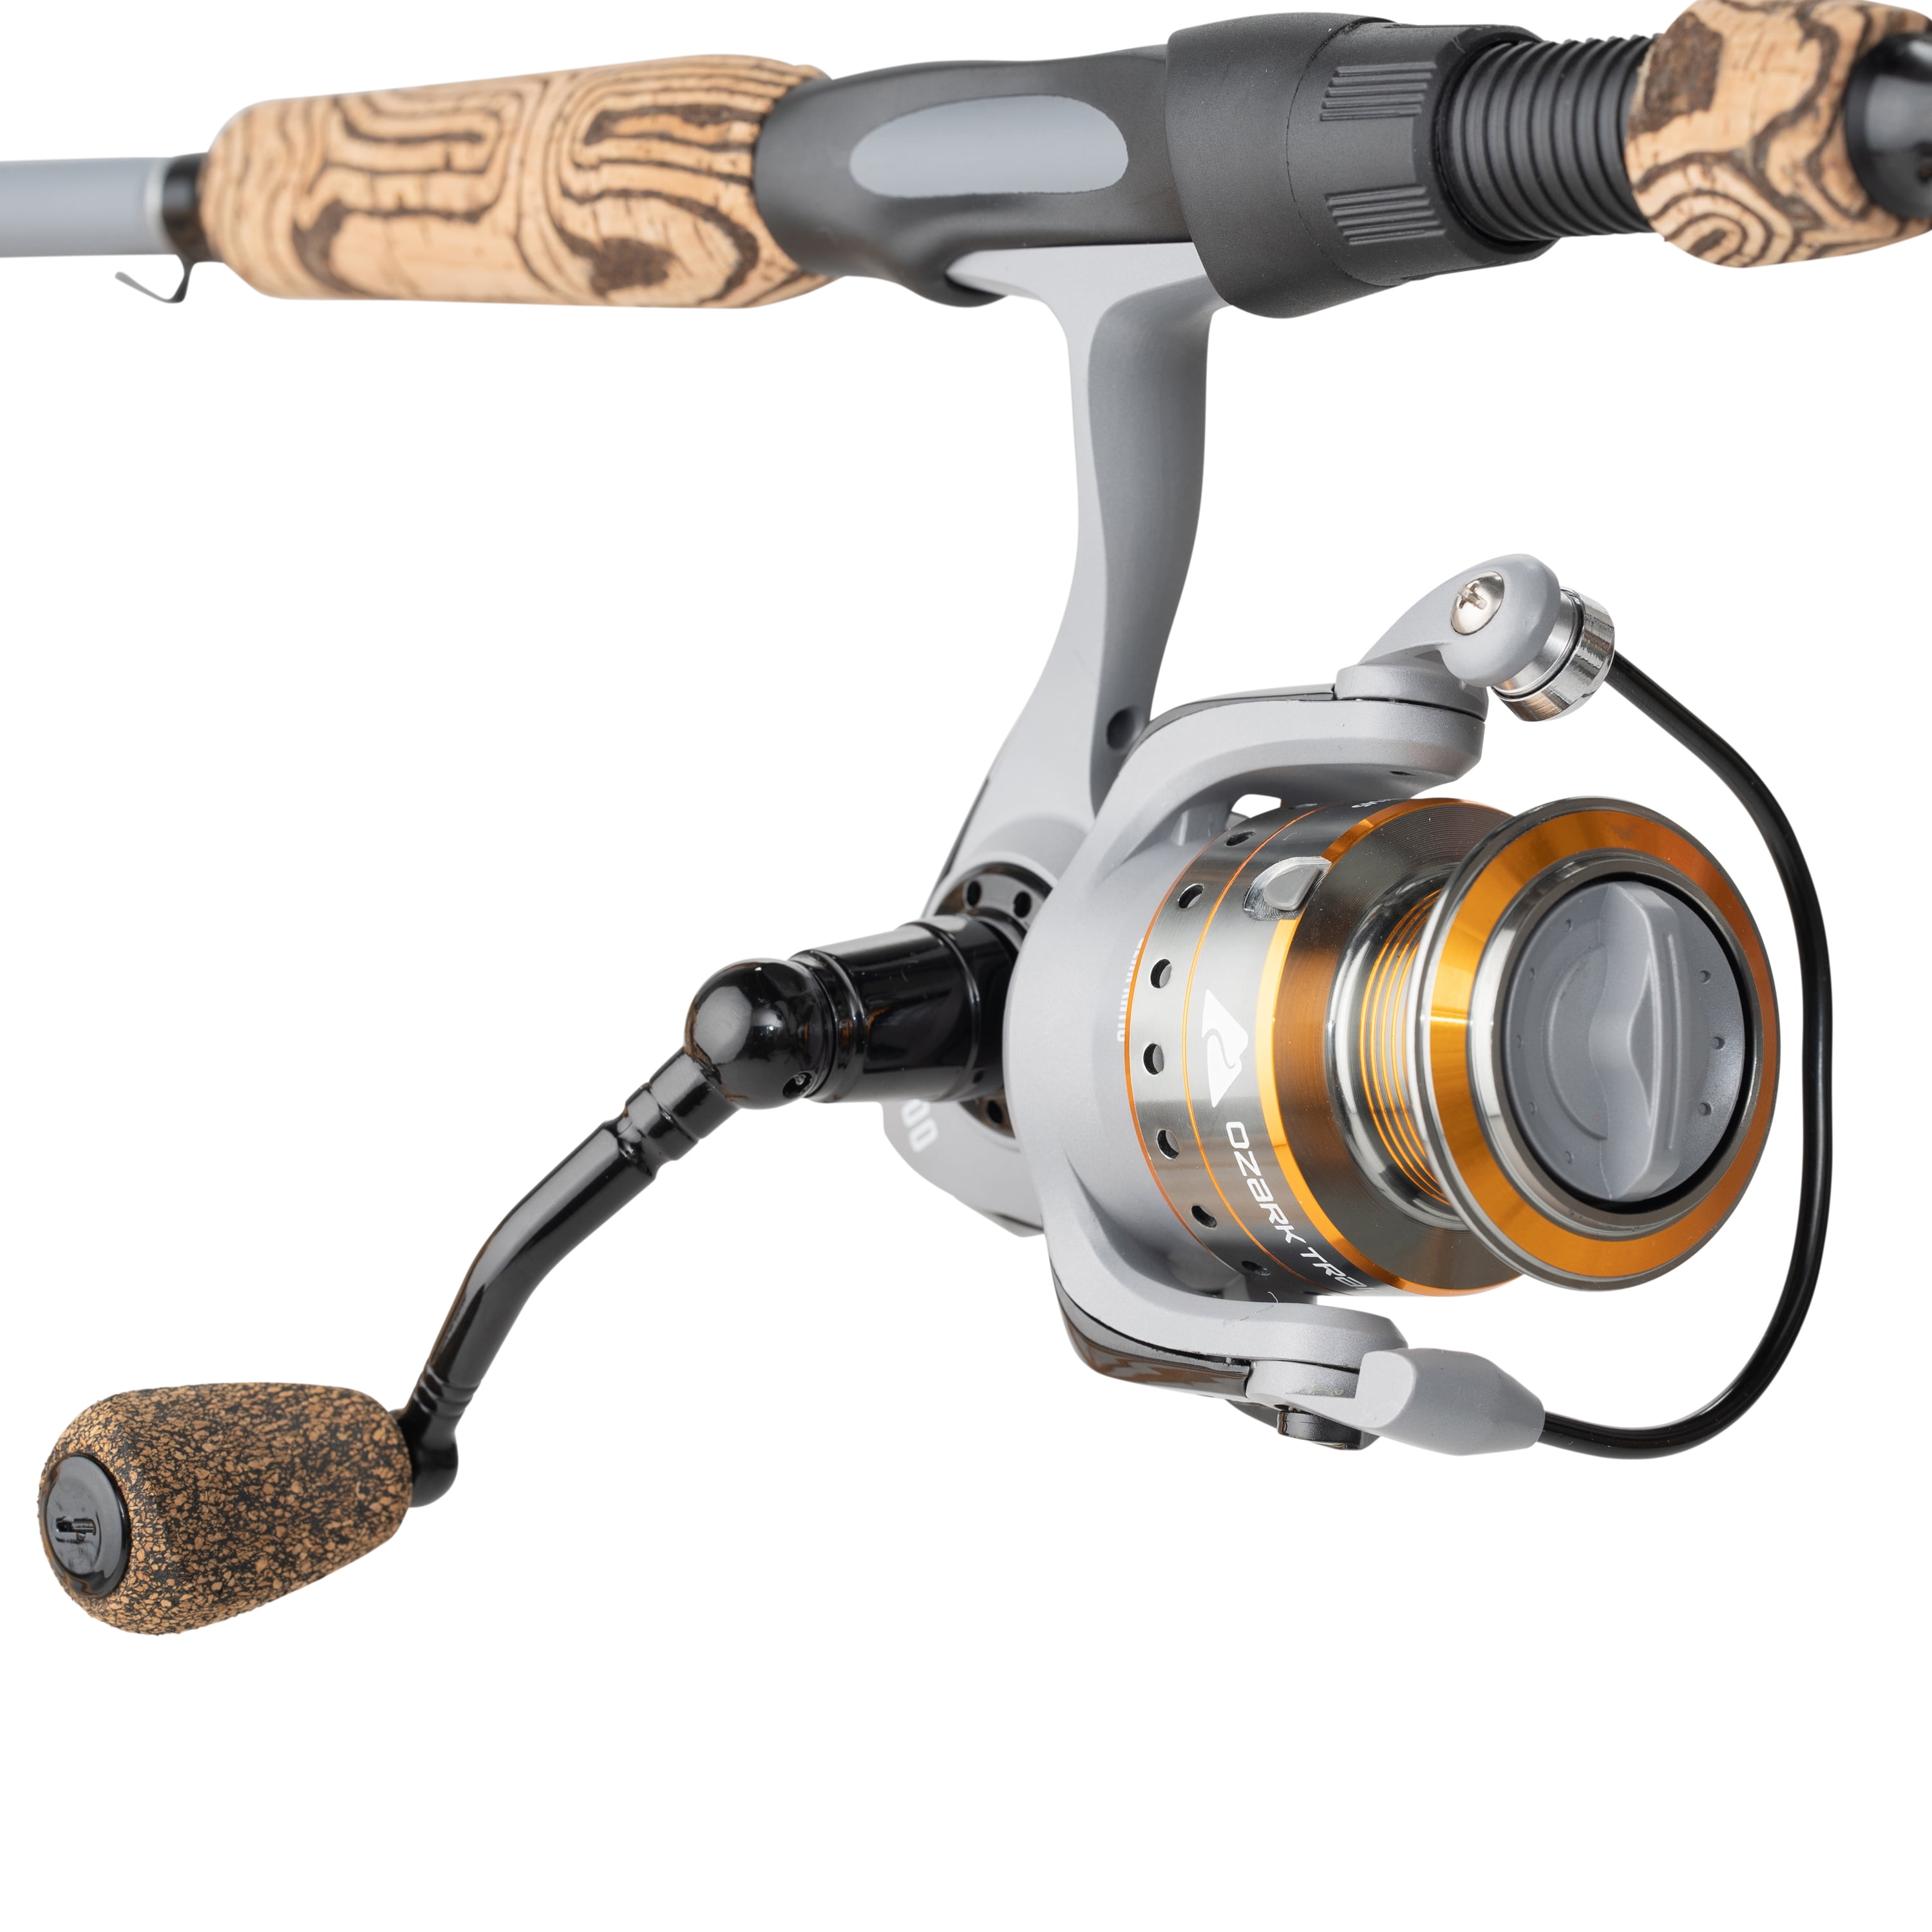 Ozark Trail Piece Fly Fishing Rod Reel Combo With Flies,, 43% OFF